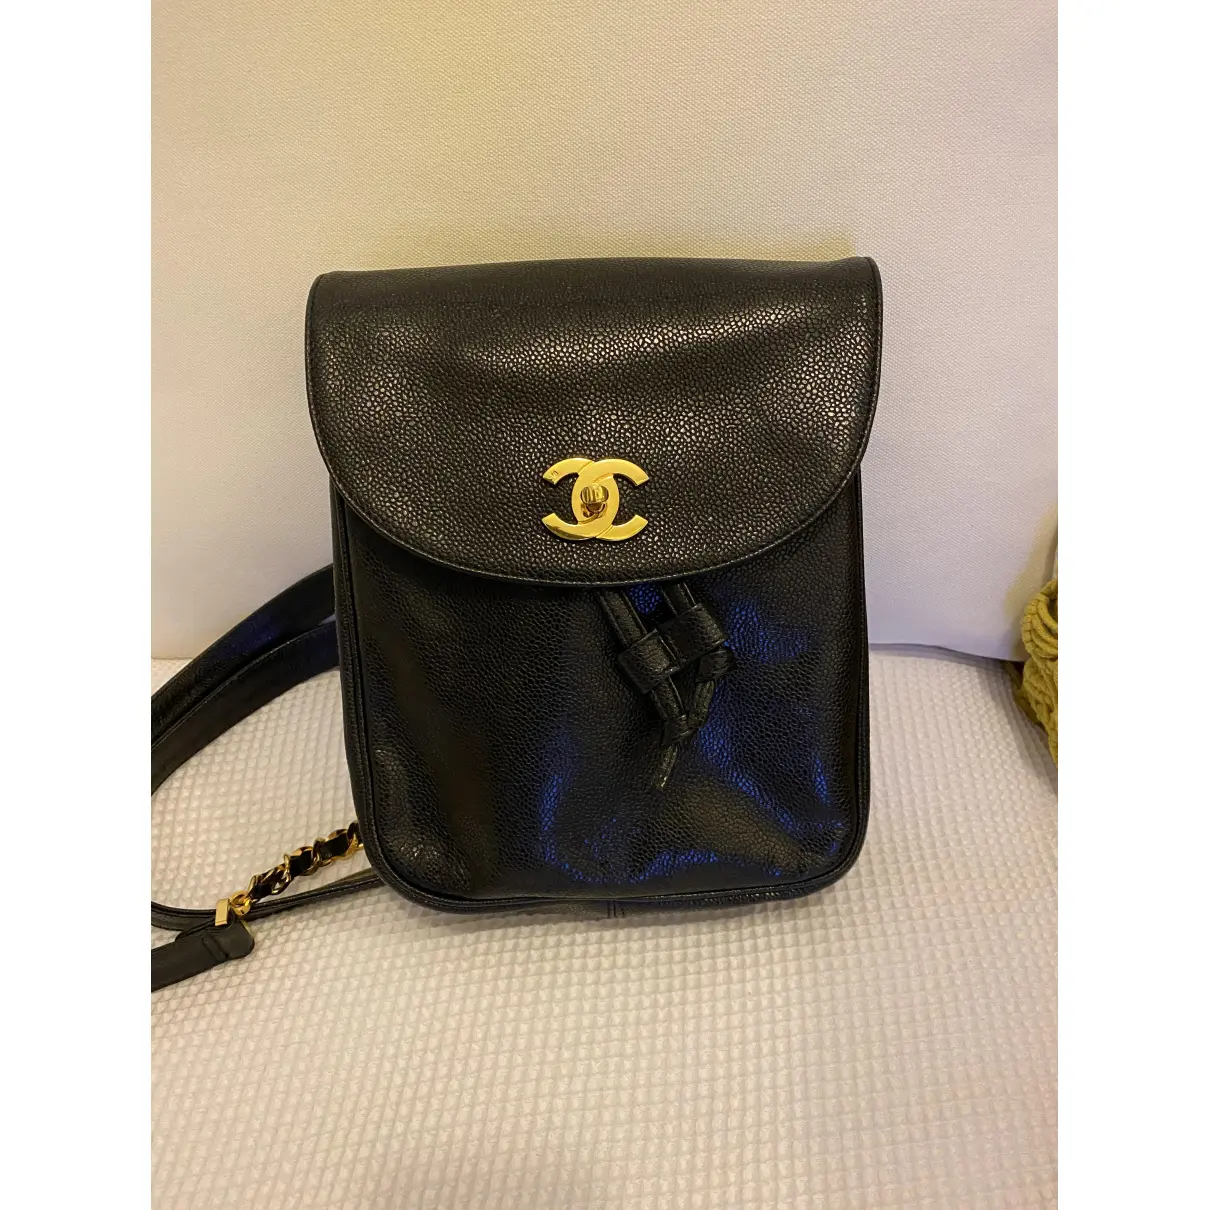 Timeless/Classique leather backpack Chanel - Vintage